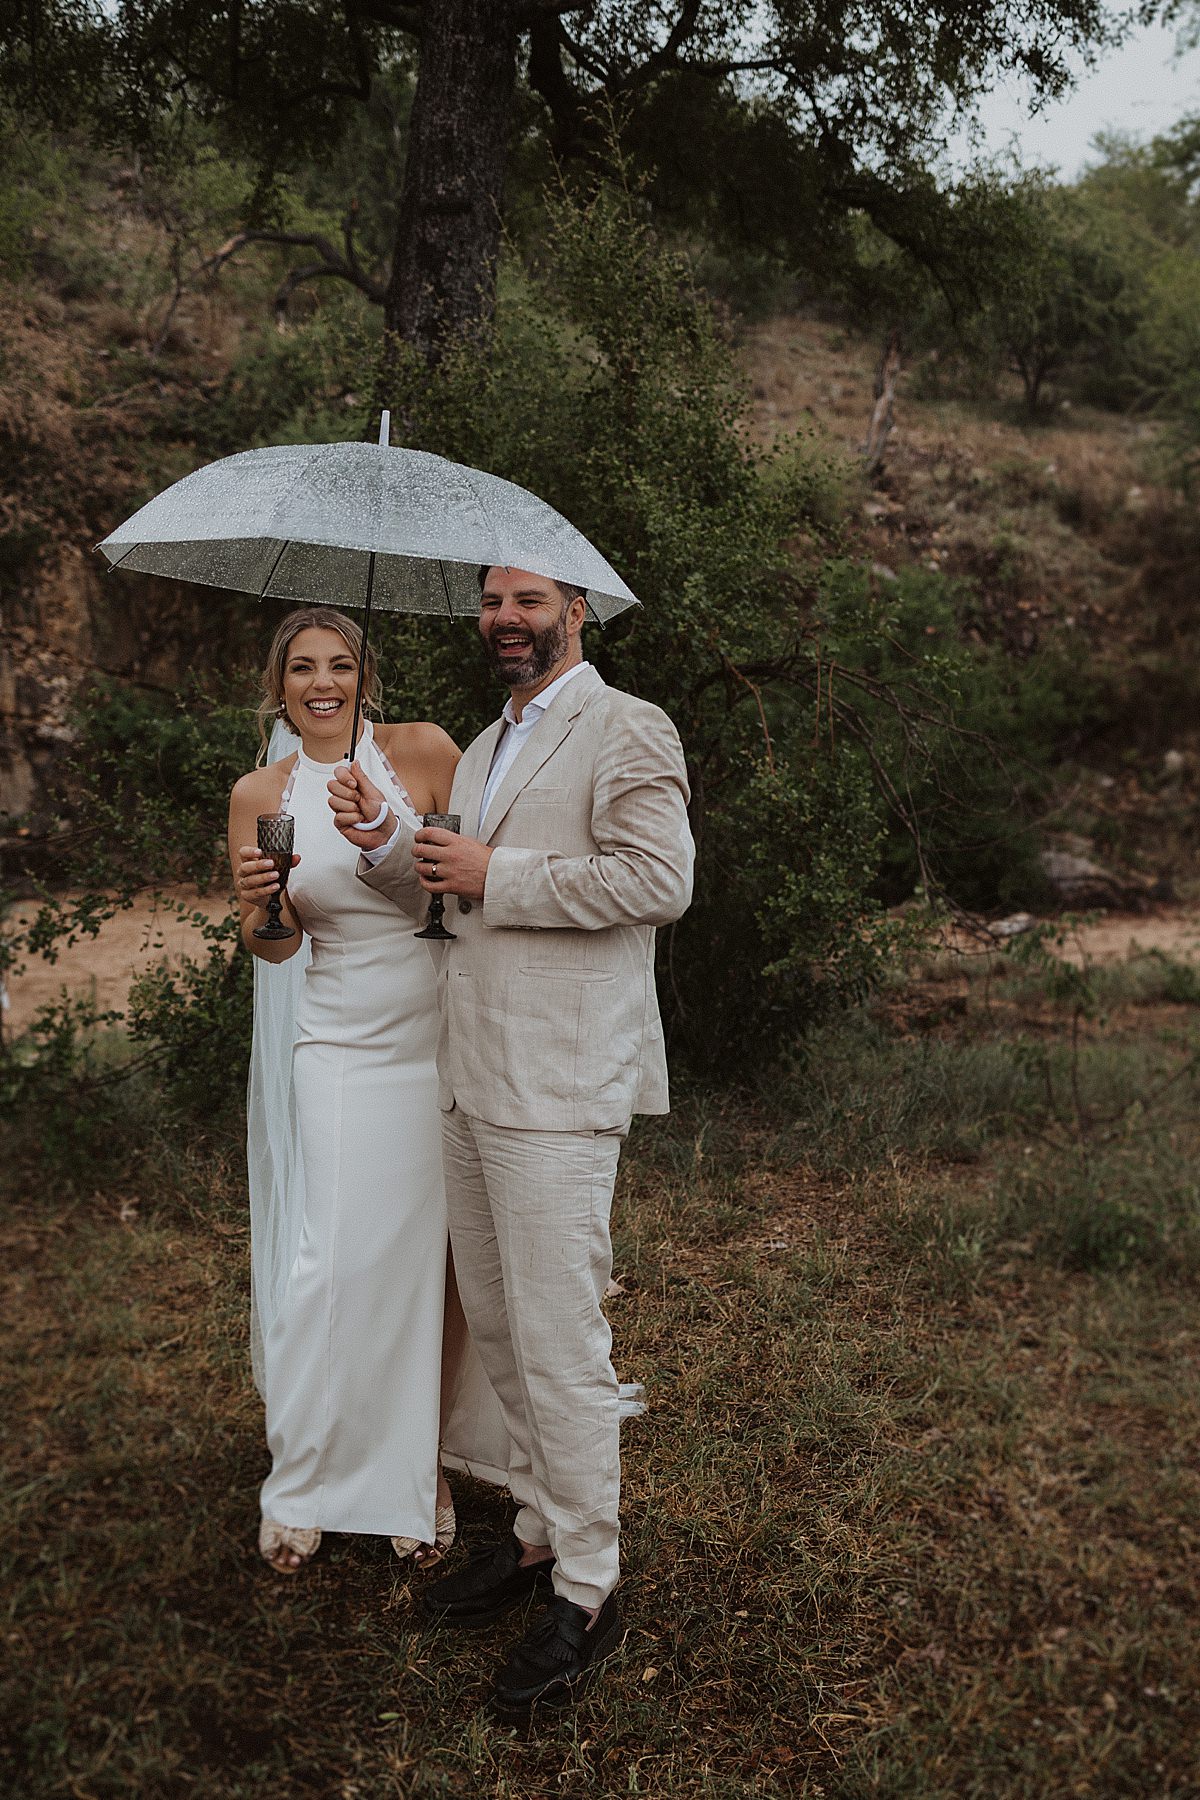 rainy wedding day for bride and groom